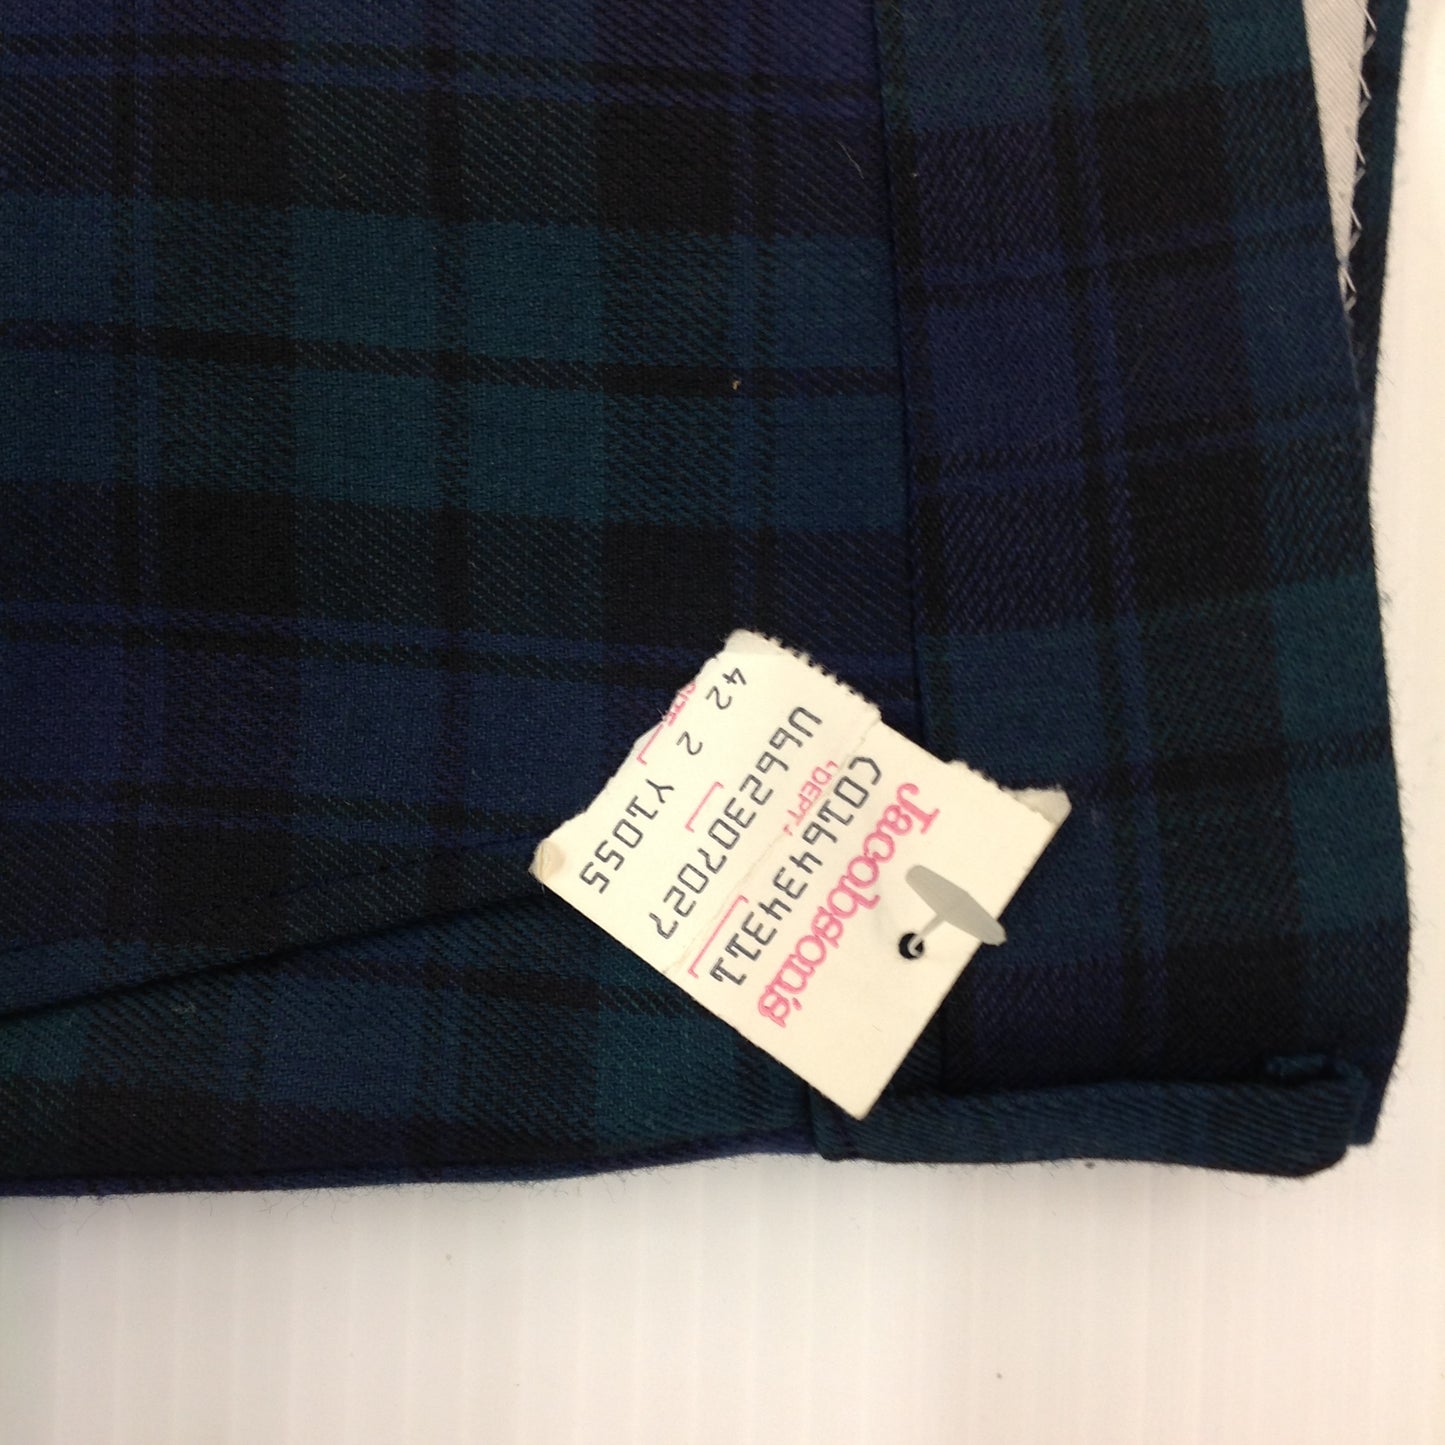 Vintage 2001 New with Tags Jacobson's of Detroit Plaid Tartan Golf Pants 42 x 32